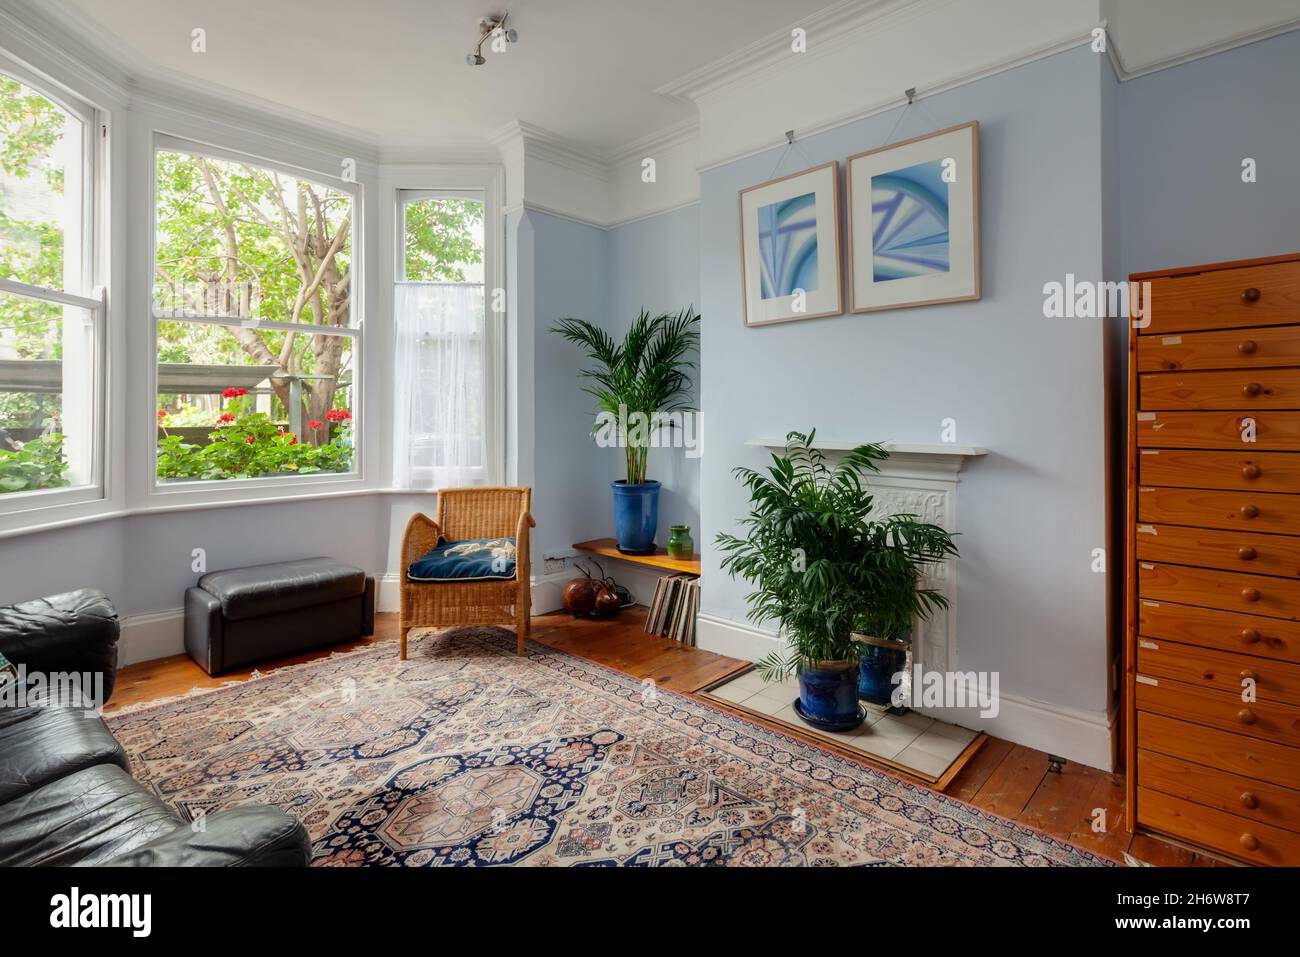 Cambridge, England - August 21 2019: Bay fronted reception room within traditional english victorian home retaining original features Stock Photo